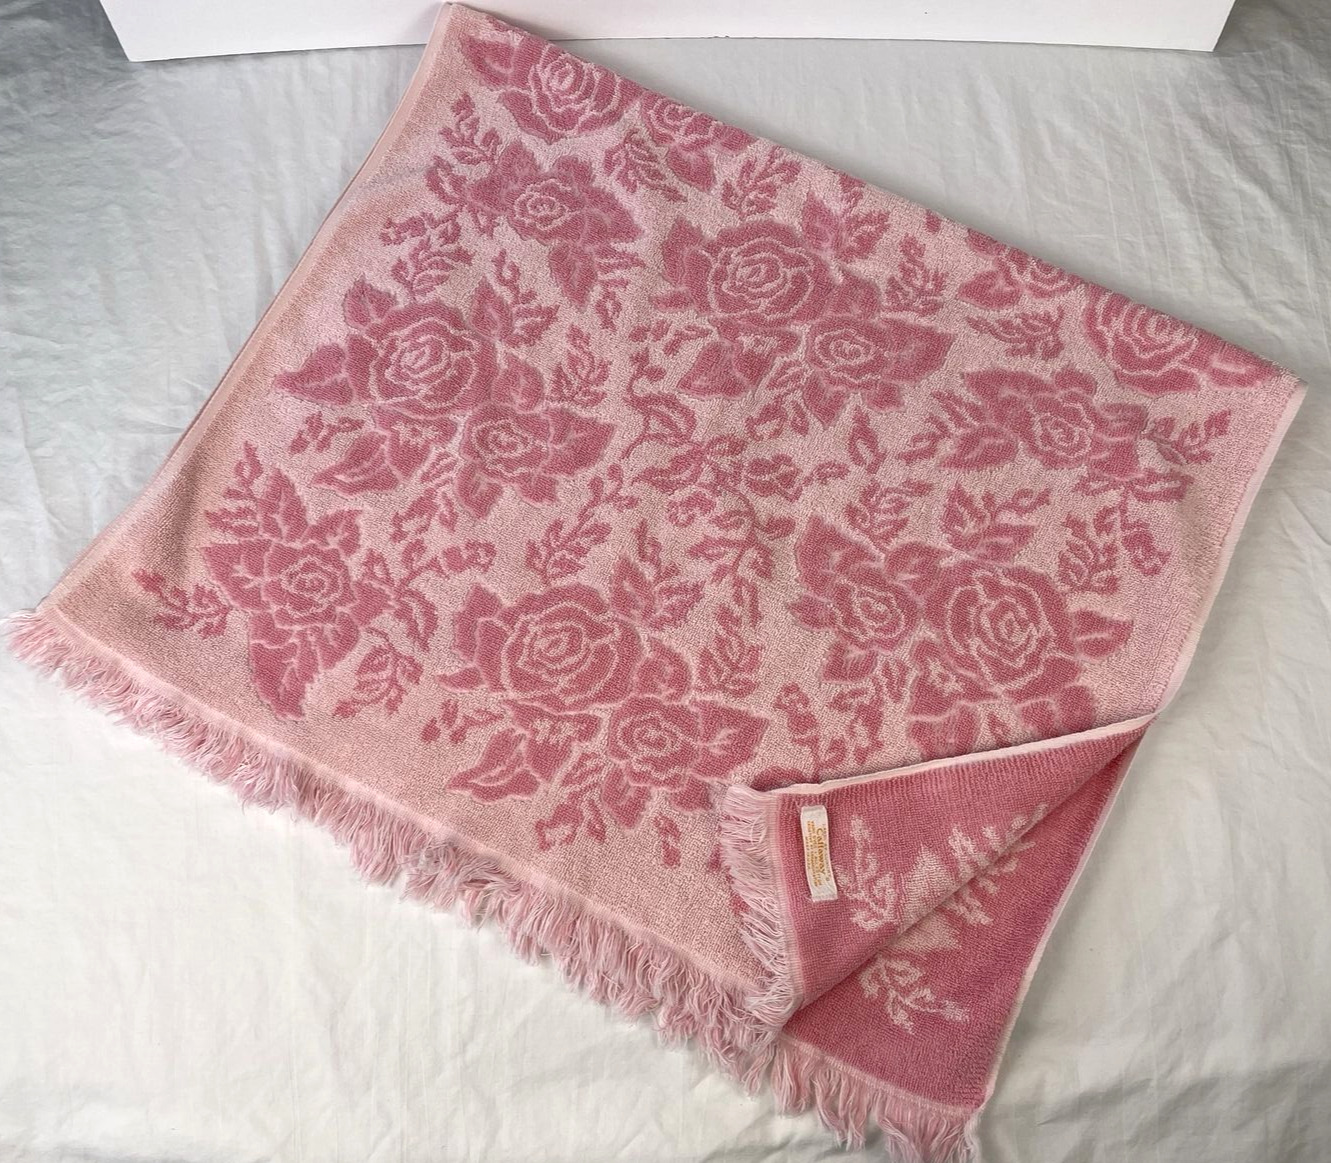 Vintage Callaway Floral Cut Away Pink Bath Towel 60s 70s Made in USA